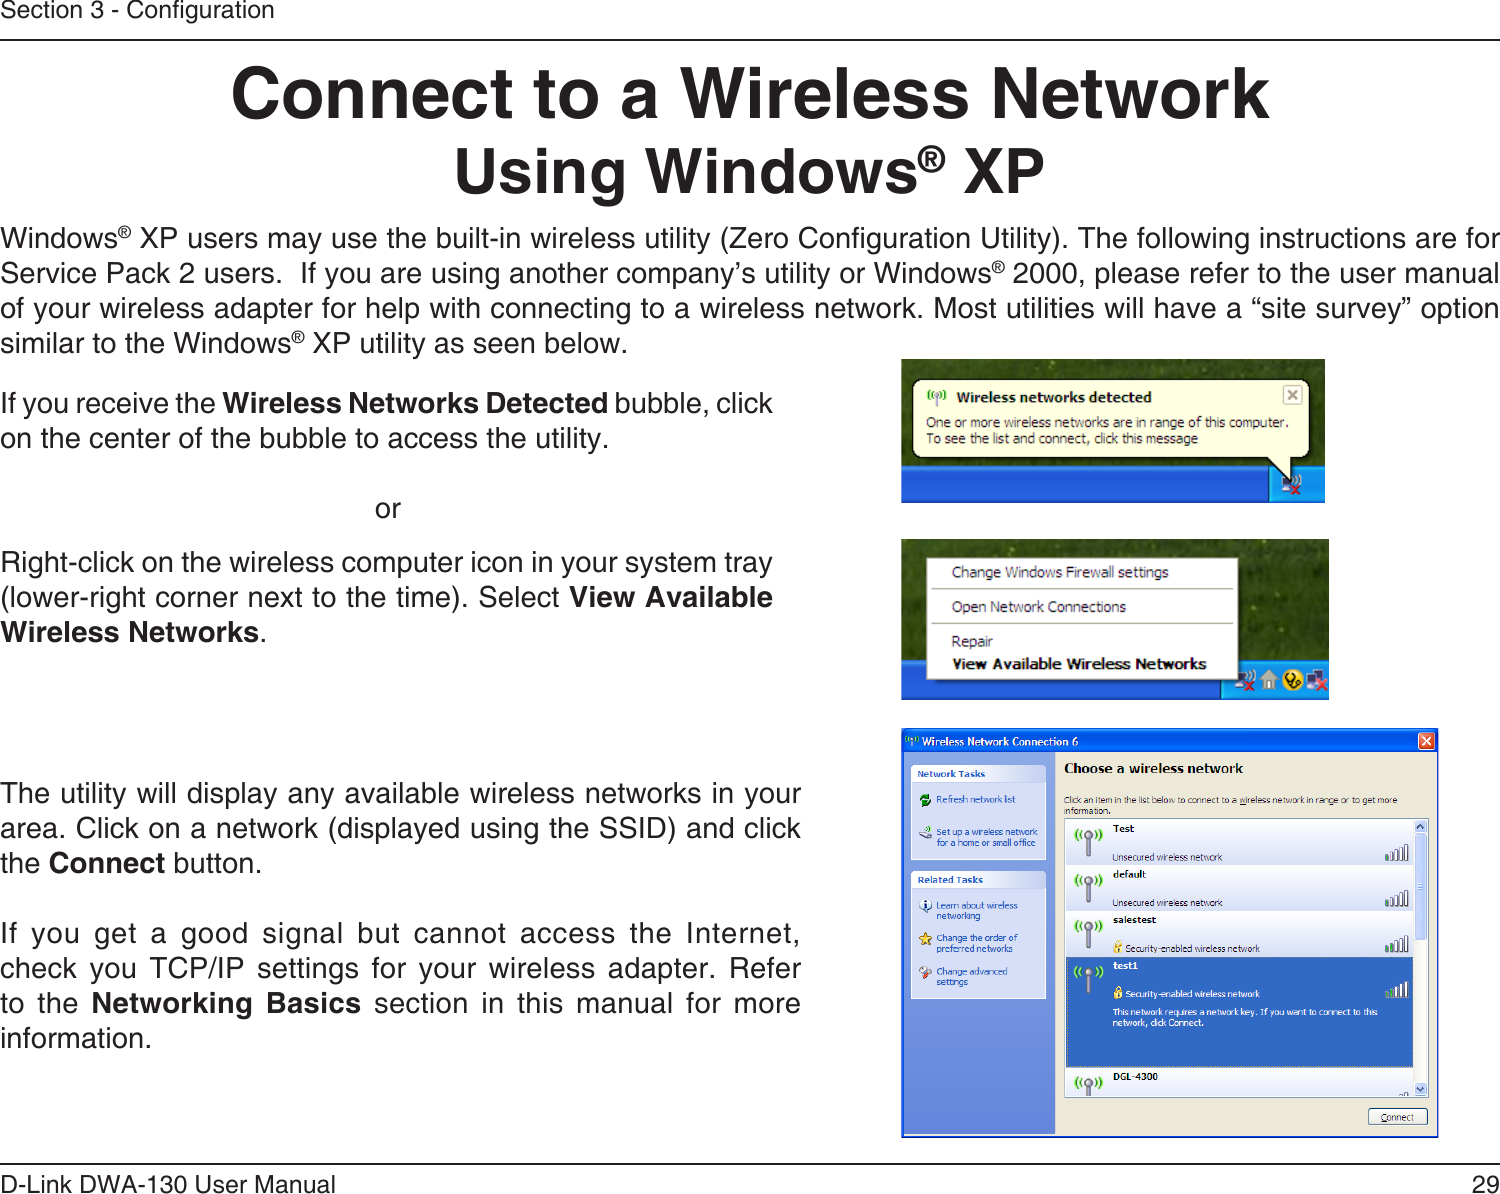 29D-Link DWA-130 User ManualSection 3 - CongurationConnect to a Wireless NetworkUsing Windows® XPWindows® XP users may use the built-in wireless utility (Zero Conguration Utility). The following instructions are for Service Pack 2 users.  If you are using another company’s utility or Windows® 2000, please refer to the user manual of your wireless adapter for help with connecting to a wireless network. Most utilities will have a “site survey” option similar to the Windows® XP utility as seen below.Right-click on the wireless computer icon in your system tray (lower-right corner next to the time). Select View Available Wireless Networks.If you receive the Wireless Networks Detected bubble, click on the center of the bubble to access the utility.     orThe utility will display any available wireless networks in your area. Click on a network (displayed using the SSID) and click the Connect button.If  you  get  a  good  signal  but  cannot  access  the  Internet, check  you  TCP/IP  settings  for  your  wireless  adapter.  Refer to  the  Networking  Basics  section  in  this  manual  for  more information.